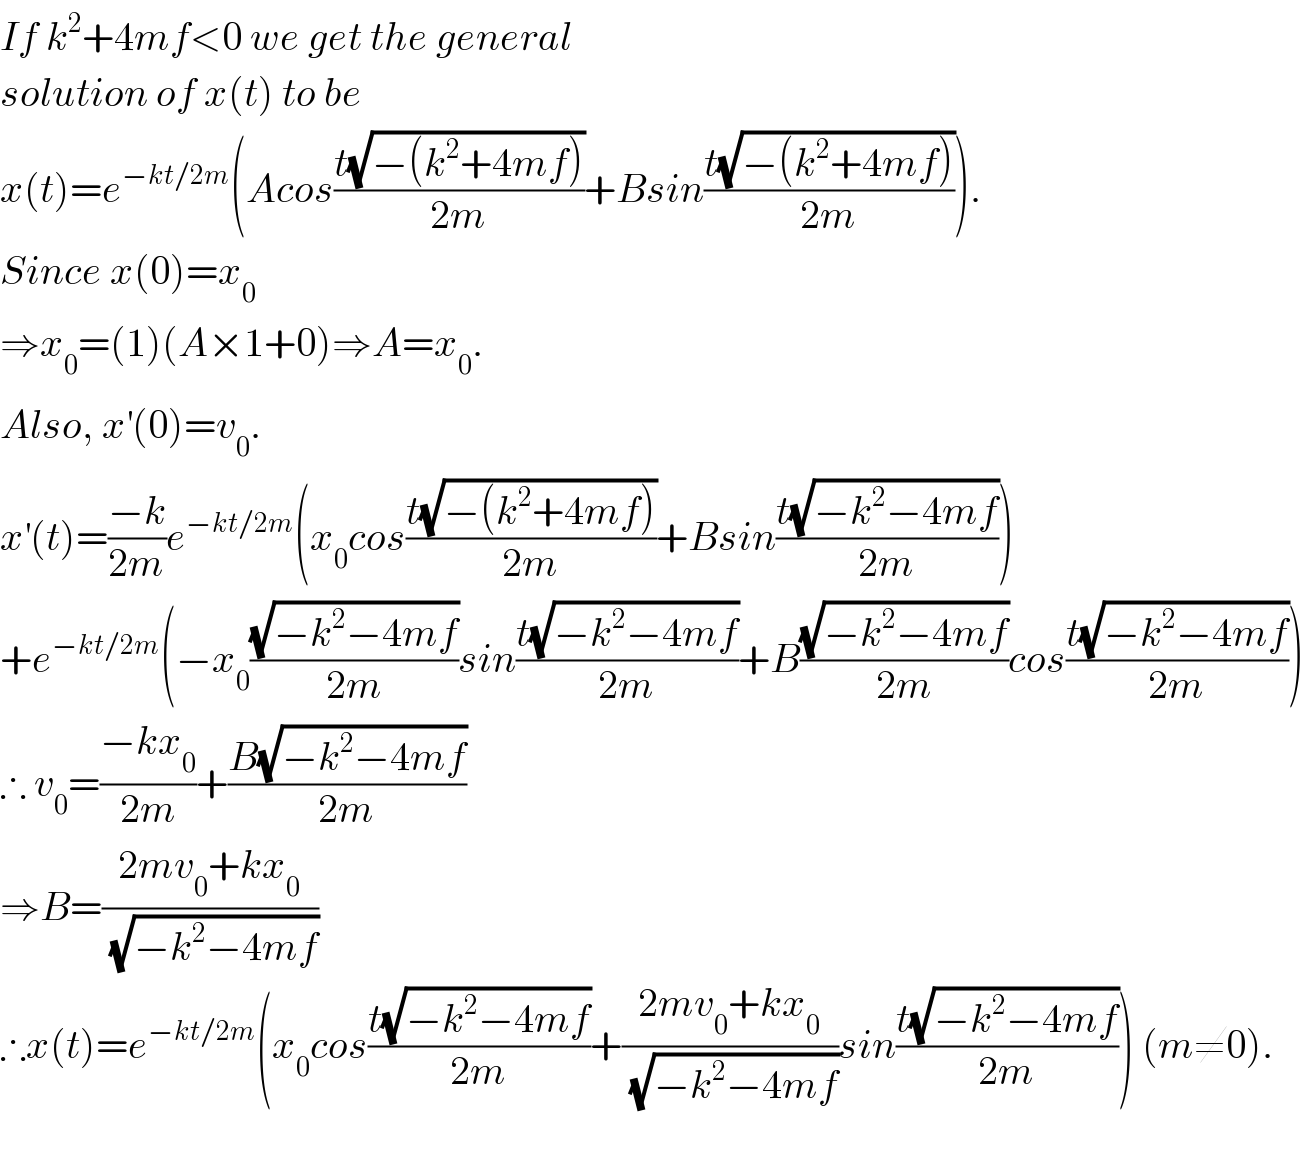 If k^2 +4mf<0 we get the general  solution of x(t) to be  x(t)=e^(−kt/2m) (Acos((t(√(−(k^2 +4mf))))/(2m))+Bsin((t(√(−(k^2 +4mf))))/(2m))).  Since x(0)=x_0    ⇒x_0 =(1)(A×1+0)⇒A=x_0 .  Also, x^′ (0)=v_0 .  x^′ (t)=((−k)/(2m))e^(−kt/2m) (x_0 cos((t(√(−(k^2 +4mf))))/(2m))+Bsin((t(√(−k^2 −4mf)))/(2m)))  +e^(−kt/2m) (−x_0 ((√(−k^2 −4mf))/(2m))sin((t(√(−k^2 −4mf)))/(2m))+B((√(−k^2 −4mf))/(2m))cos((t(√(−k^2 −4mf)))/(2m)))  ∴ v_0 =((−kx_0 )/(2m))+((B(√(−k^2 −4mf)))/(2m))  ⇒B=((2mv_0 +kx_0 )/(√(−k^2 −4mf)))  ∴x(t)=e^(−kt/2m) (x_0 cos((t(√(−k^2 −4mf)))/(2m))+((2mv_0 +kx_0 )/(√(−k^2 −4mf)))sin((t(√(−k^2 −4mf)))/(2m))) (m≠0).    